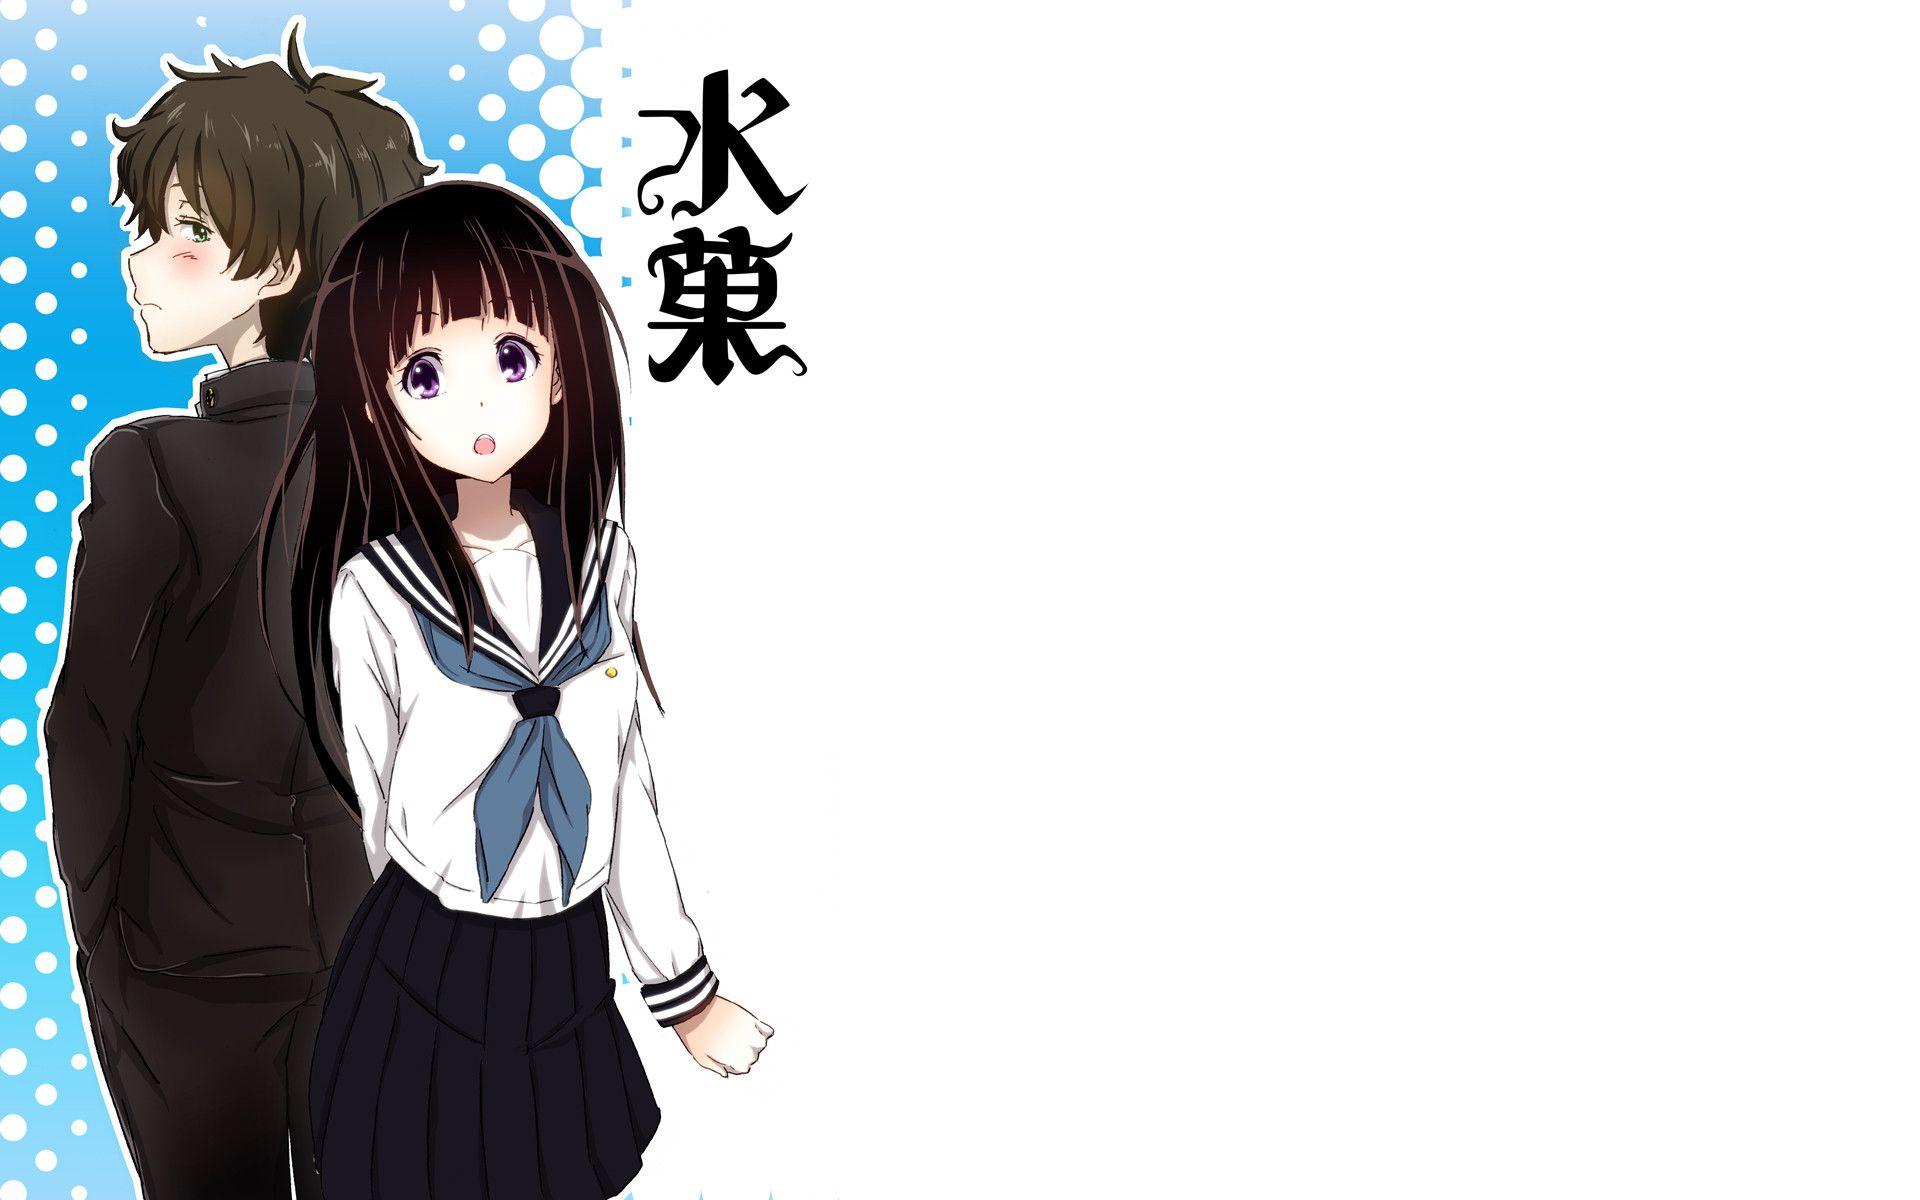 Hyouka Wallpapers Top Free Hyouka Backgrounds Wallpaperaccess